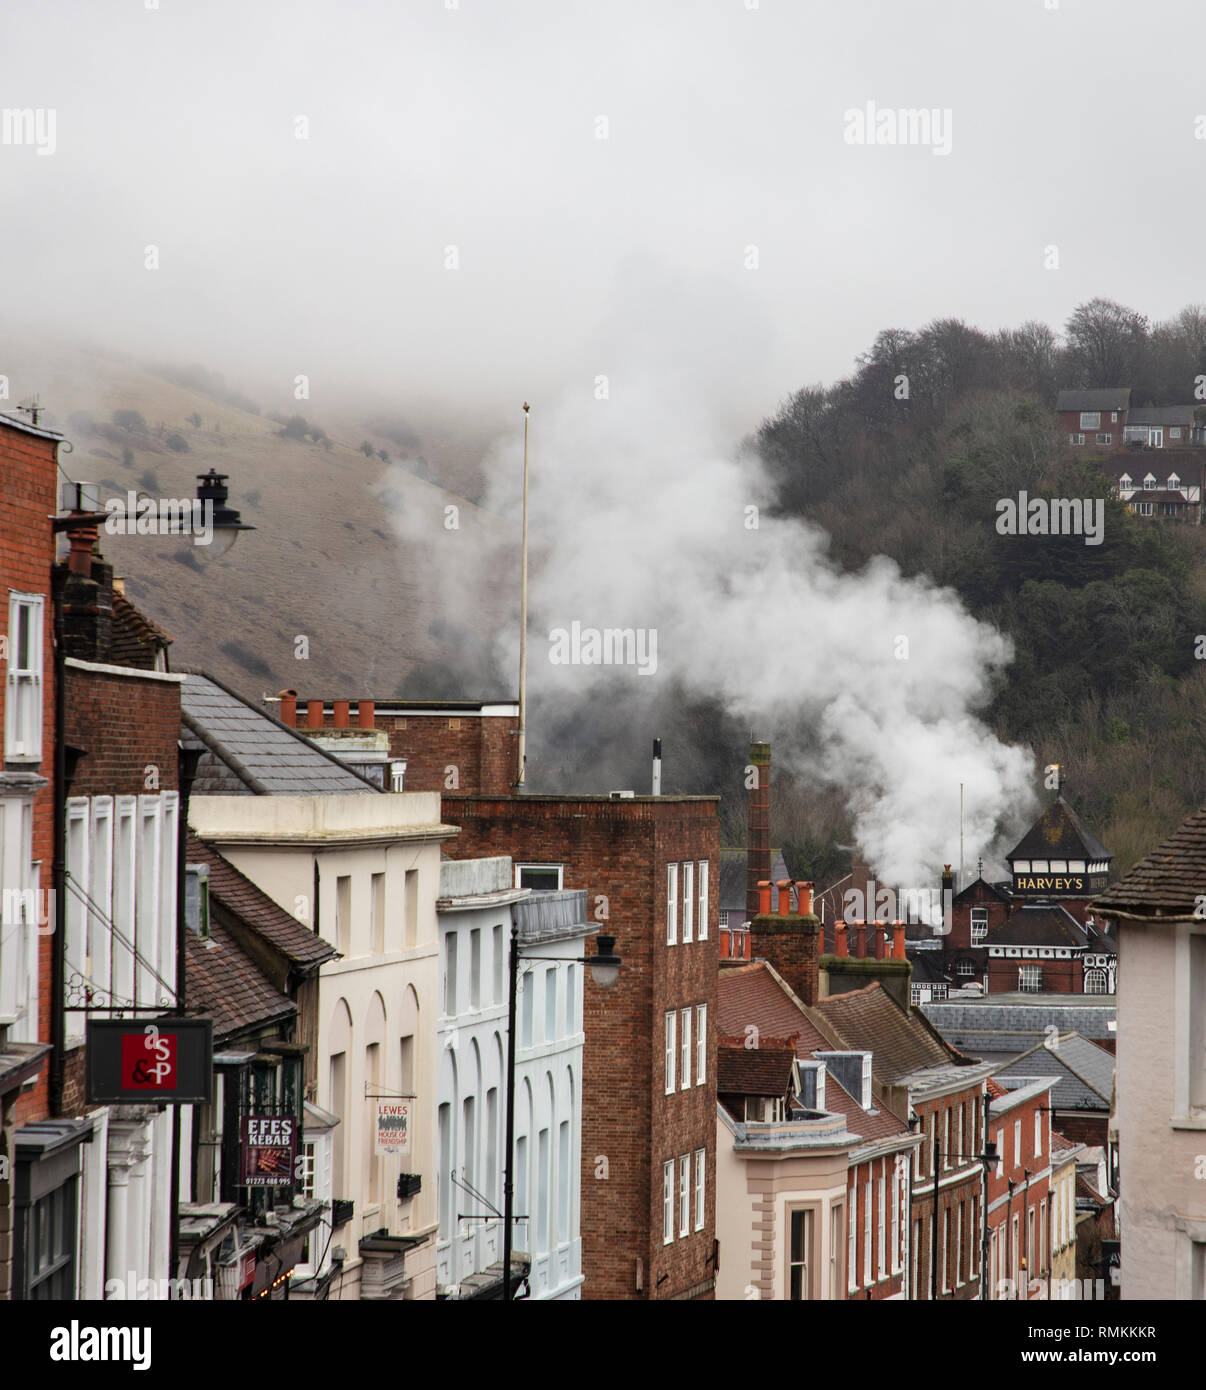 Harvey's Brewery from the High Street in Lewes with steam coming out on a busy day Stock Photo